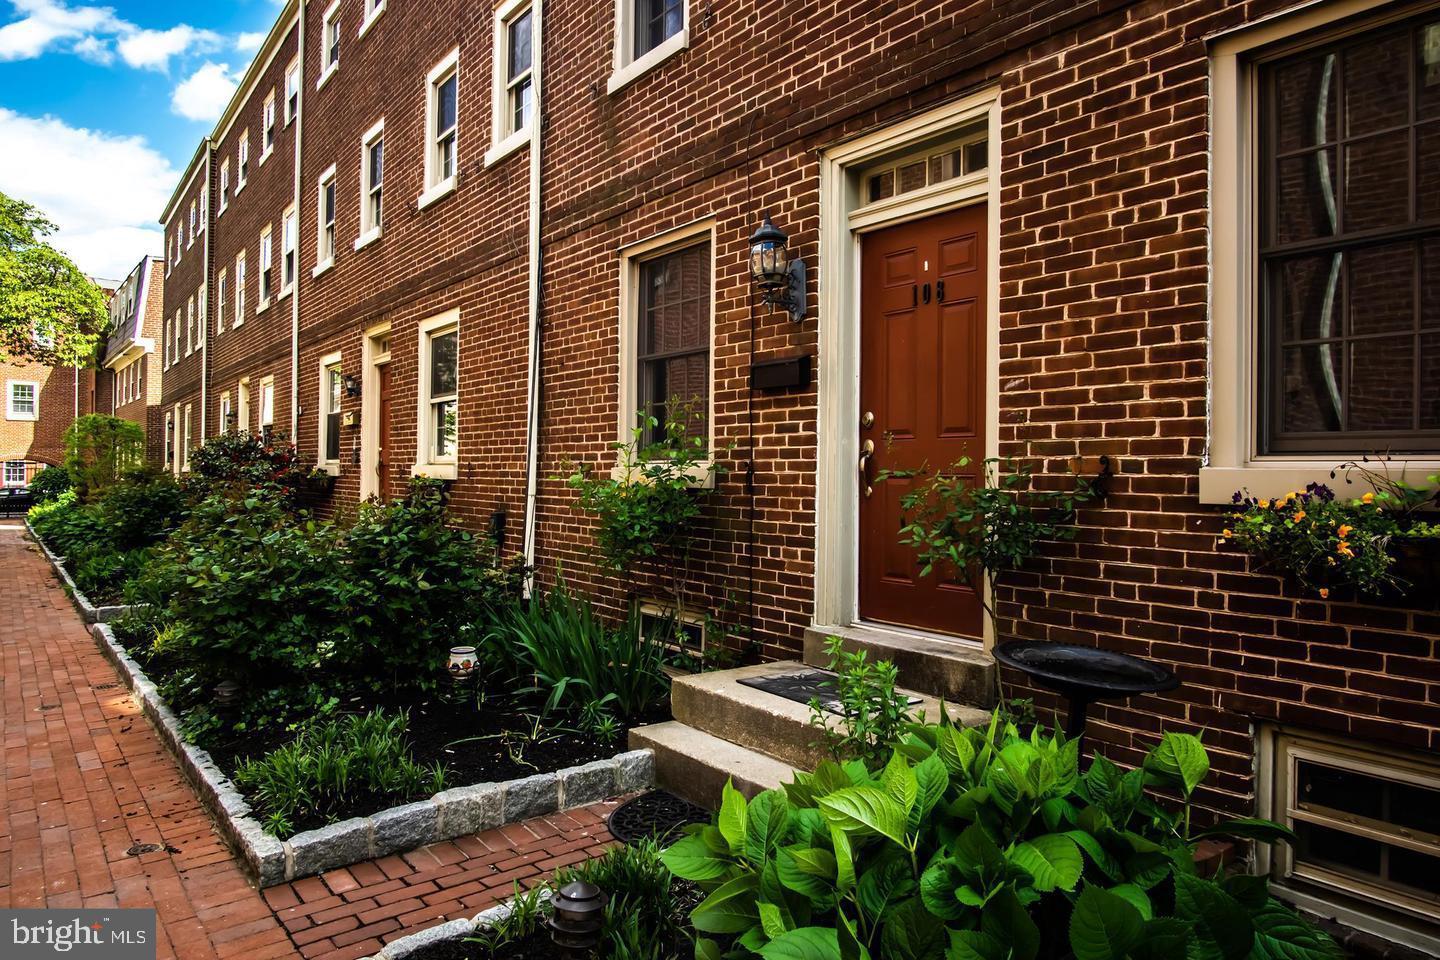 a view of a brick house with plants